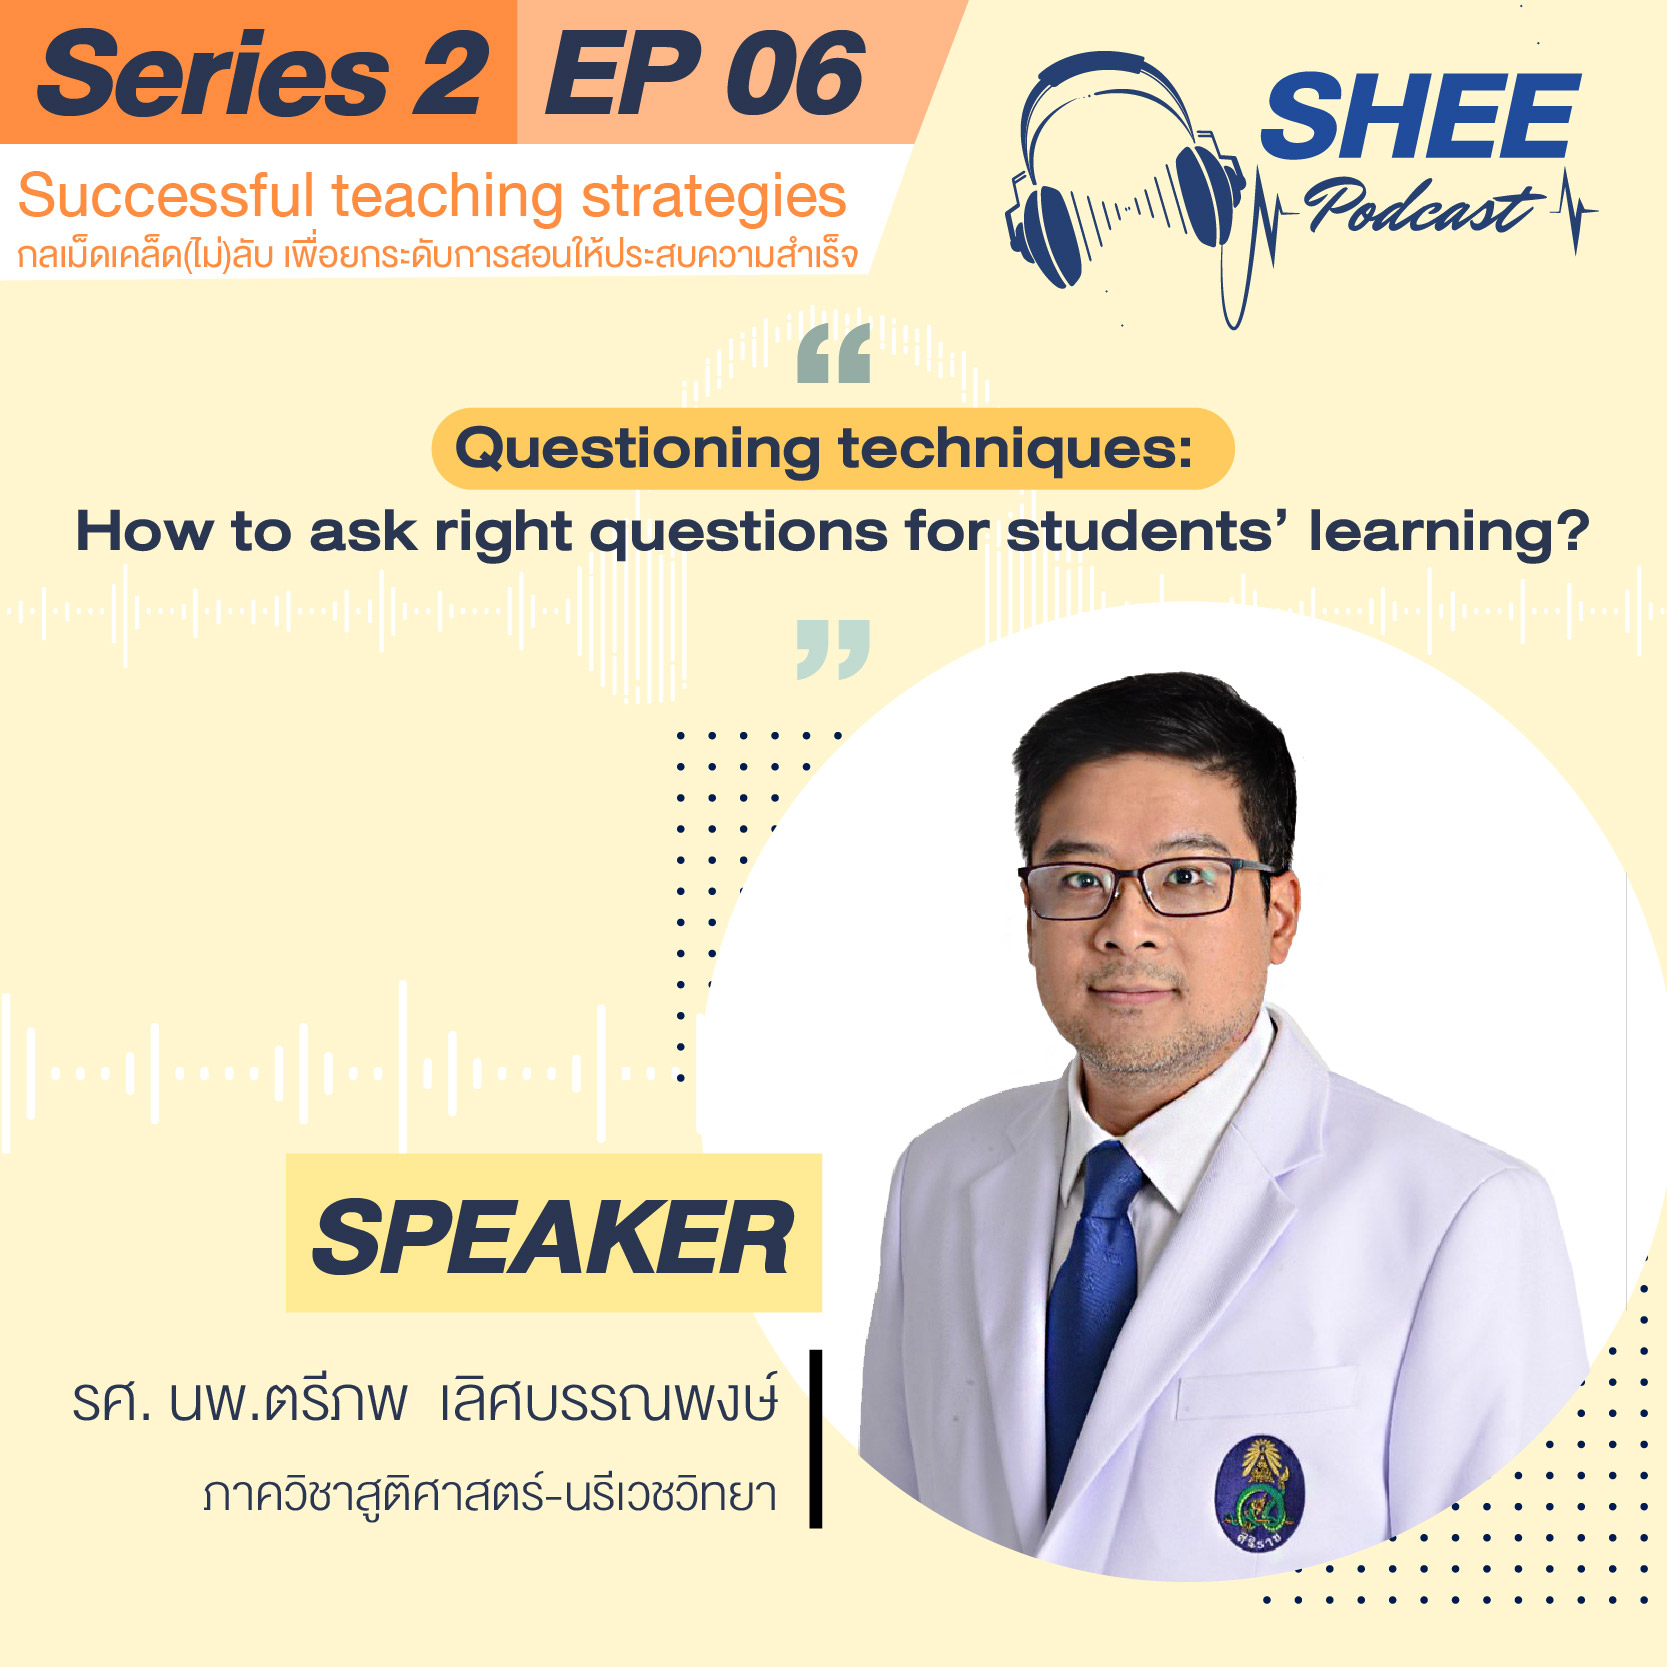 Episode 6: Questioning techniques: How to ask right questions for students’ learning?